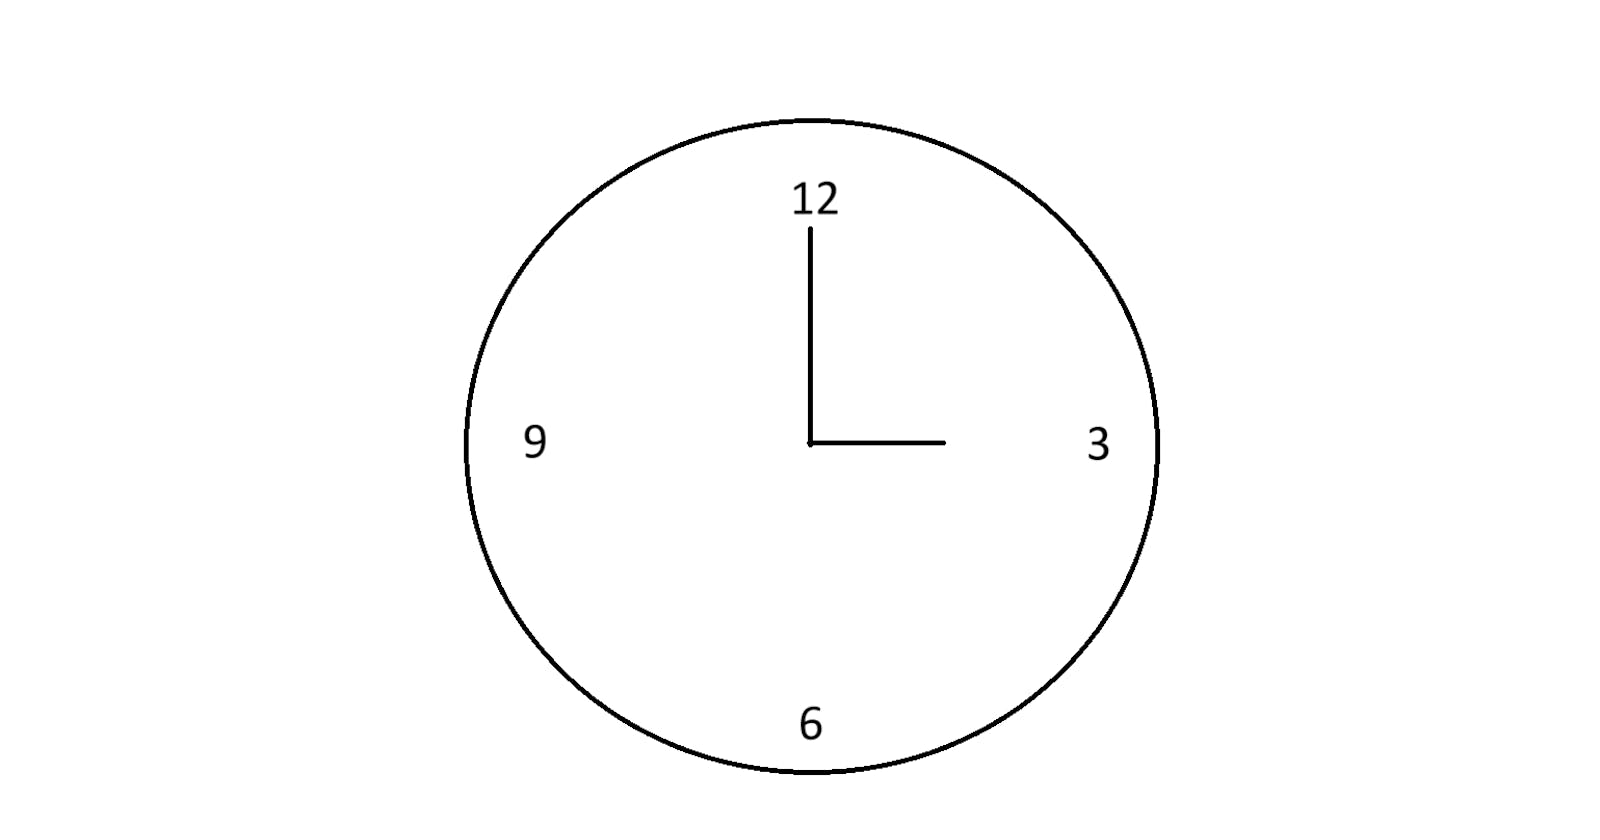 How to make a Timer in Python